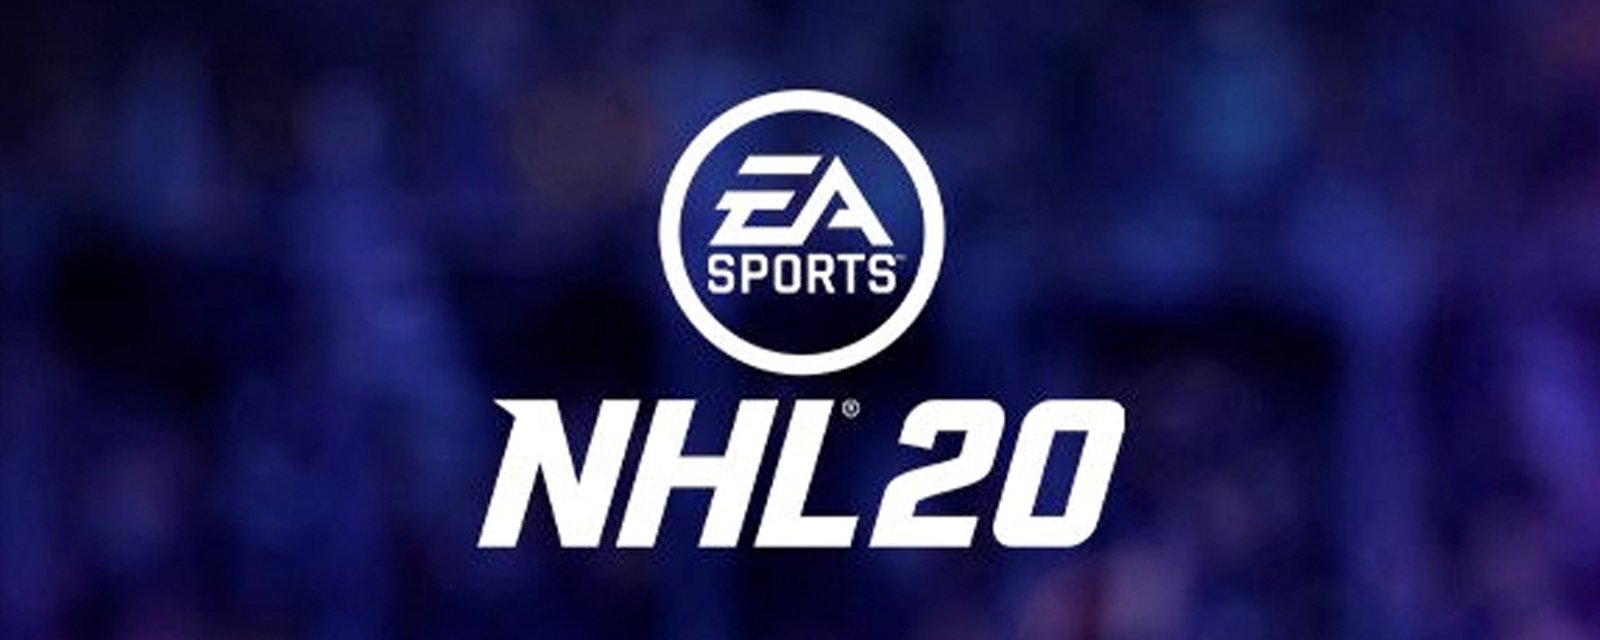 EA Sports NHL 20 demo shows significant jersey changes for one Original 6 franchise